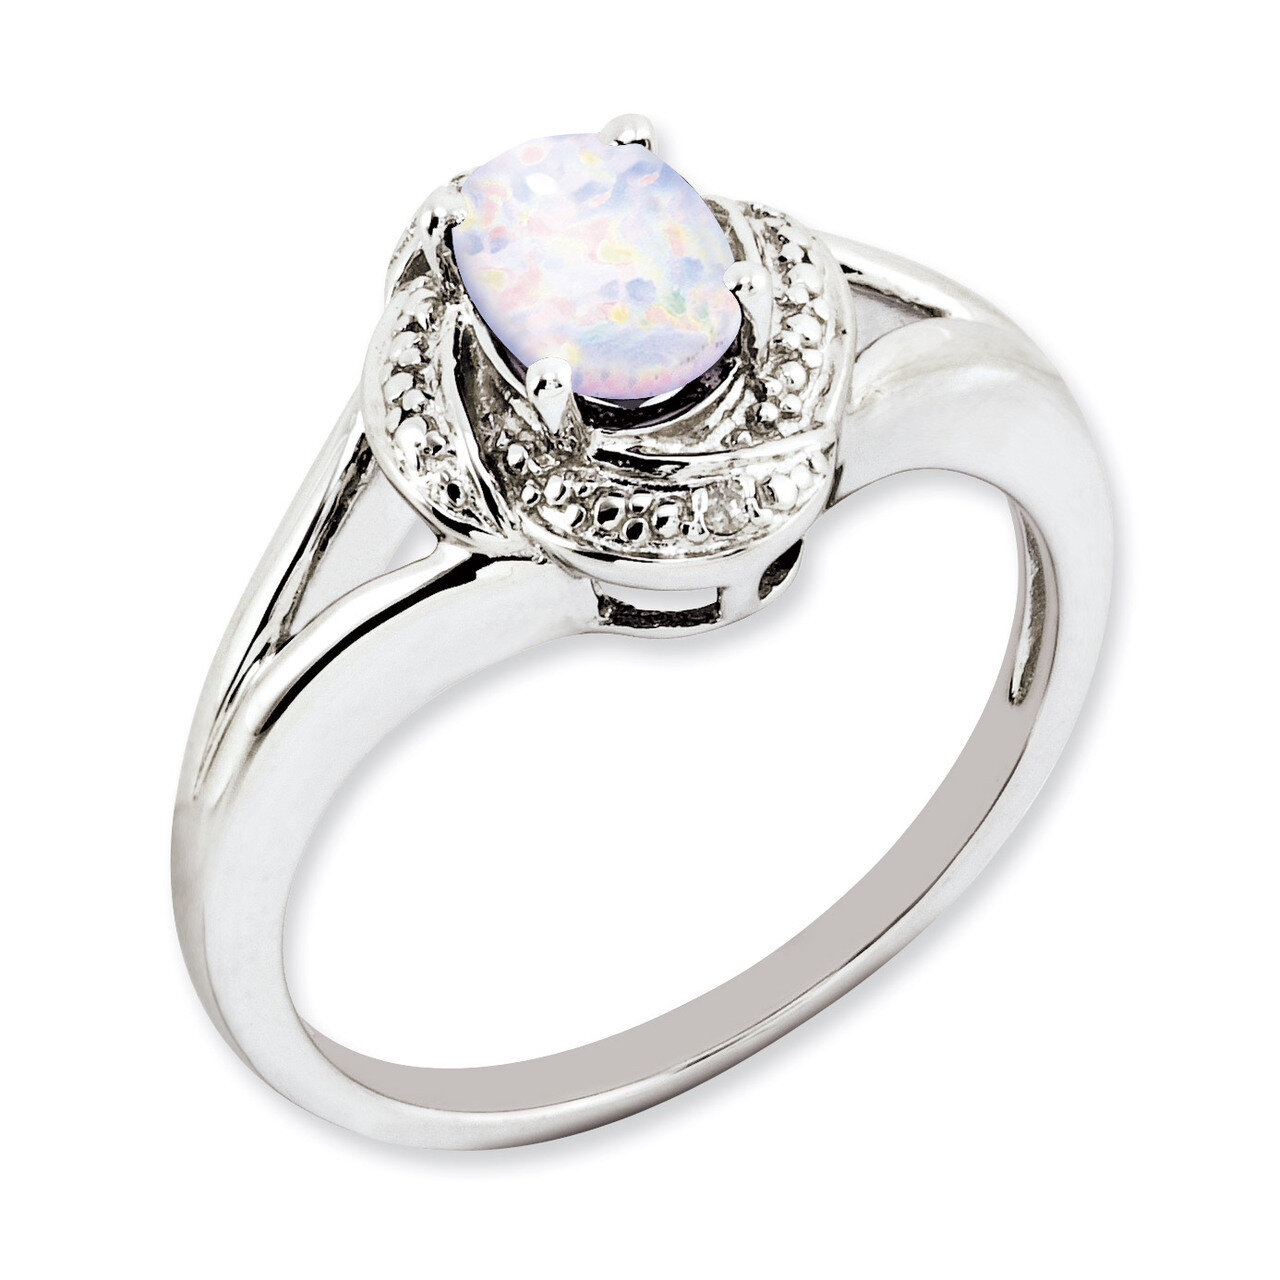 October Created Opal Ring Sterling Silver Diamond QBR12OCT